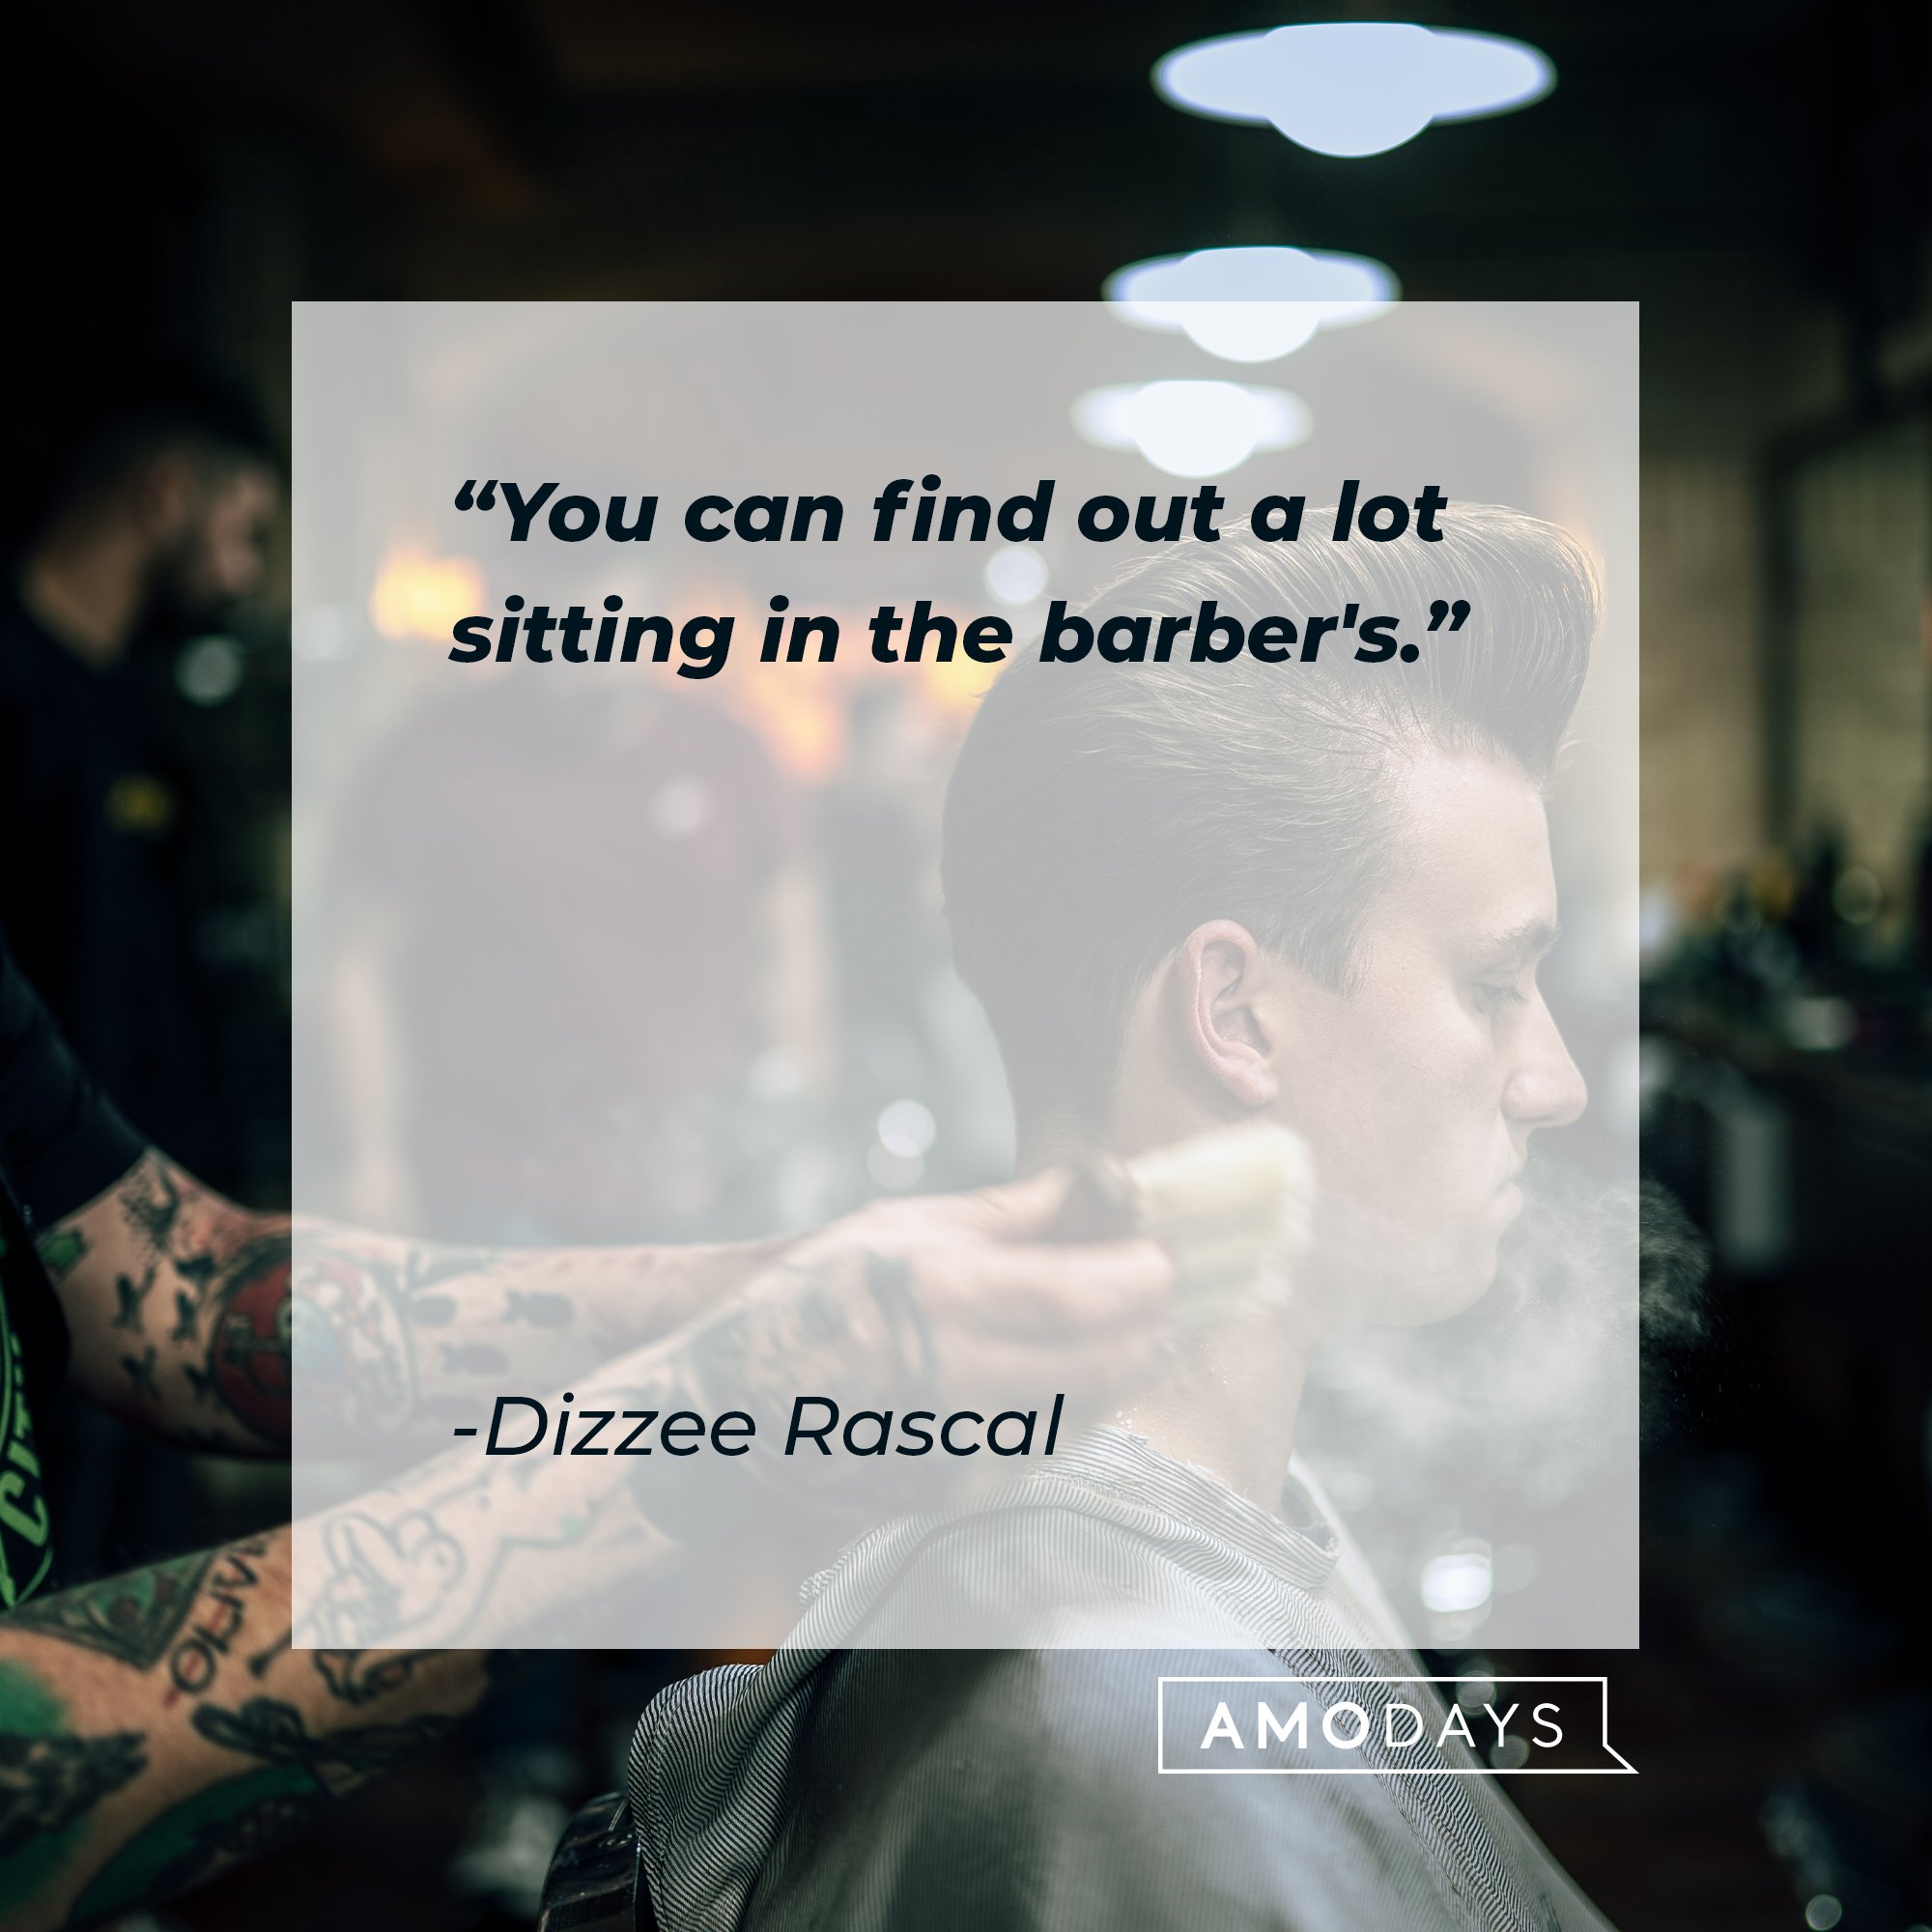 Dizzee Rascal's quote: "You can find out a lot sitting in the barber's." | Image: AmoDays